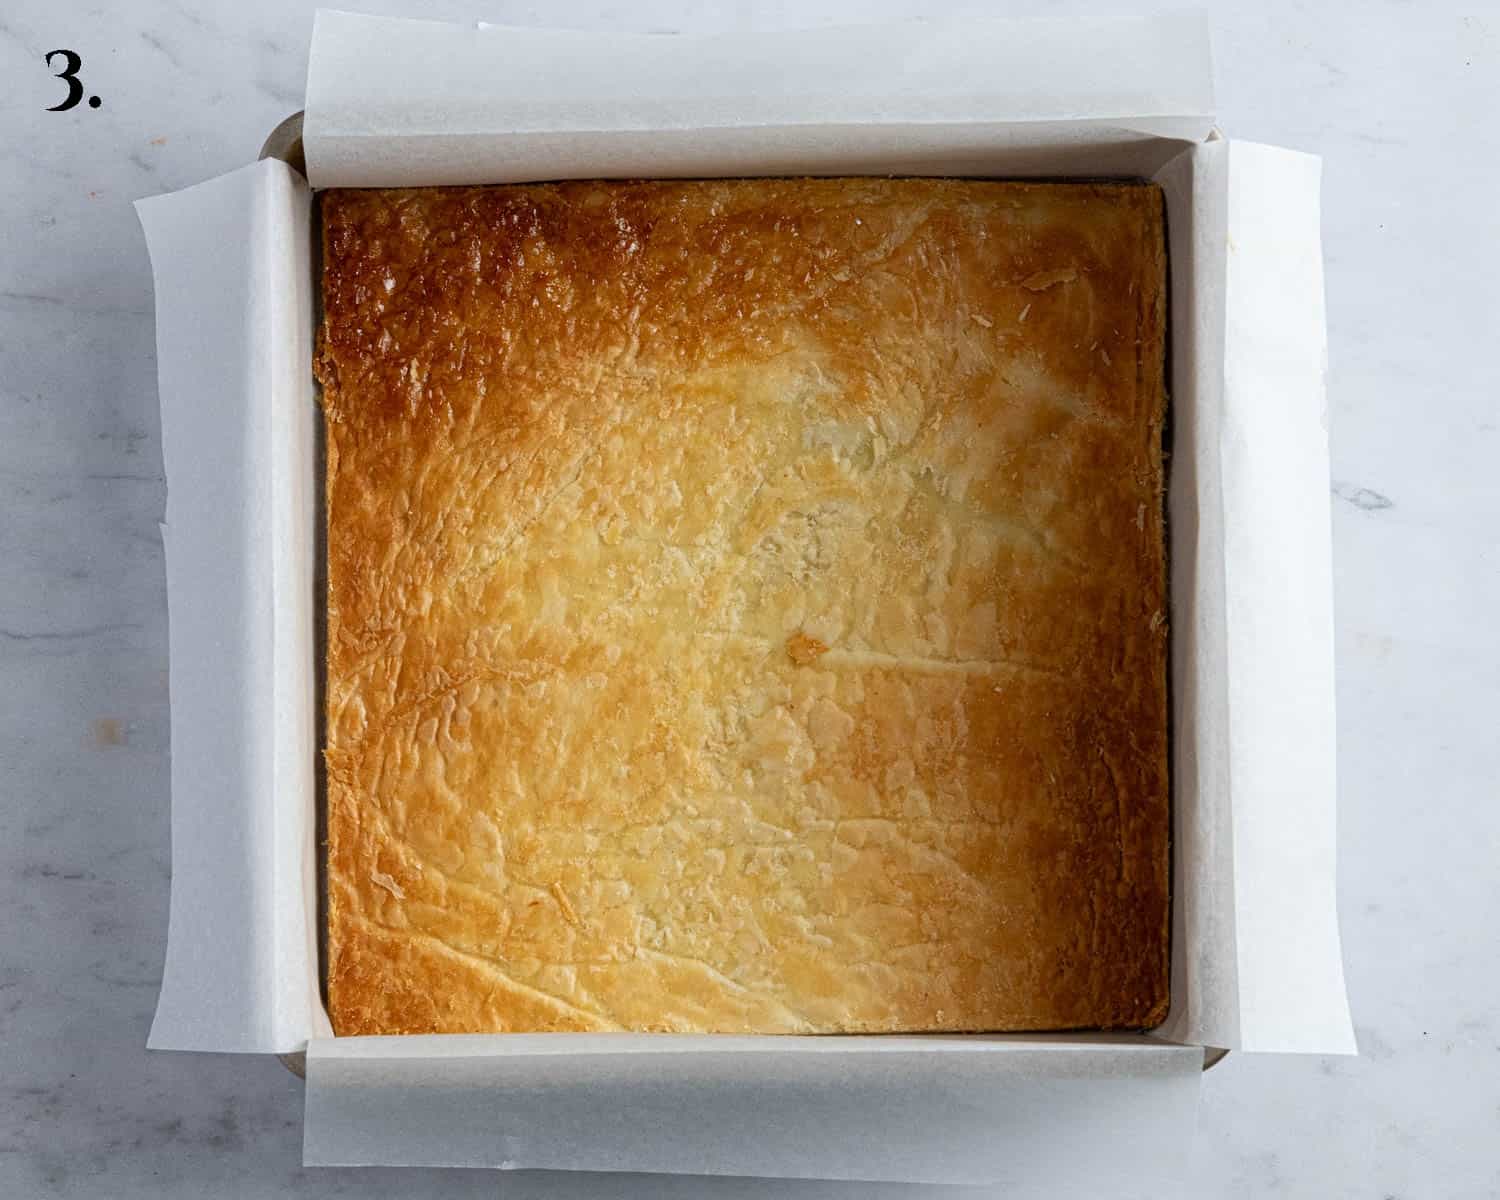 Step 3, the pastry square in the tin.